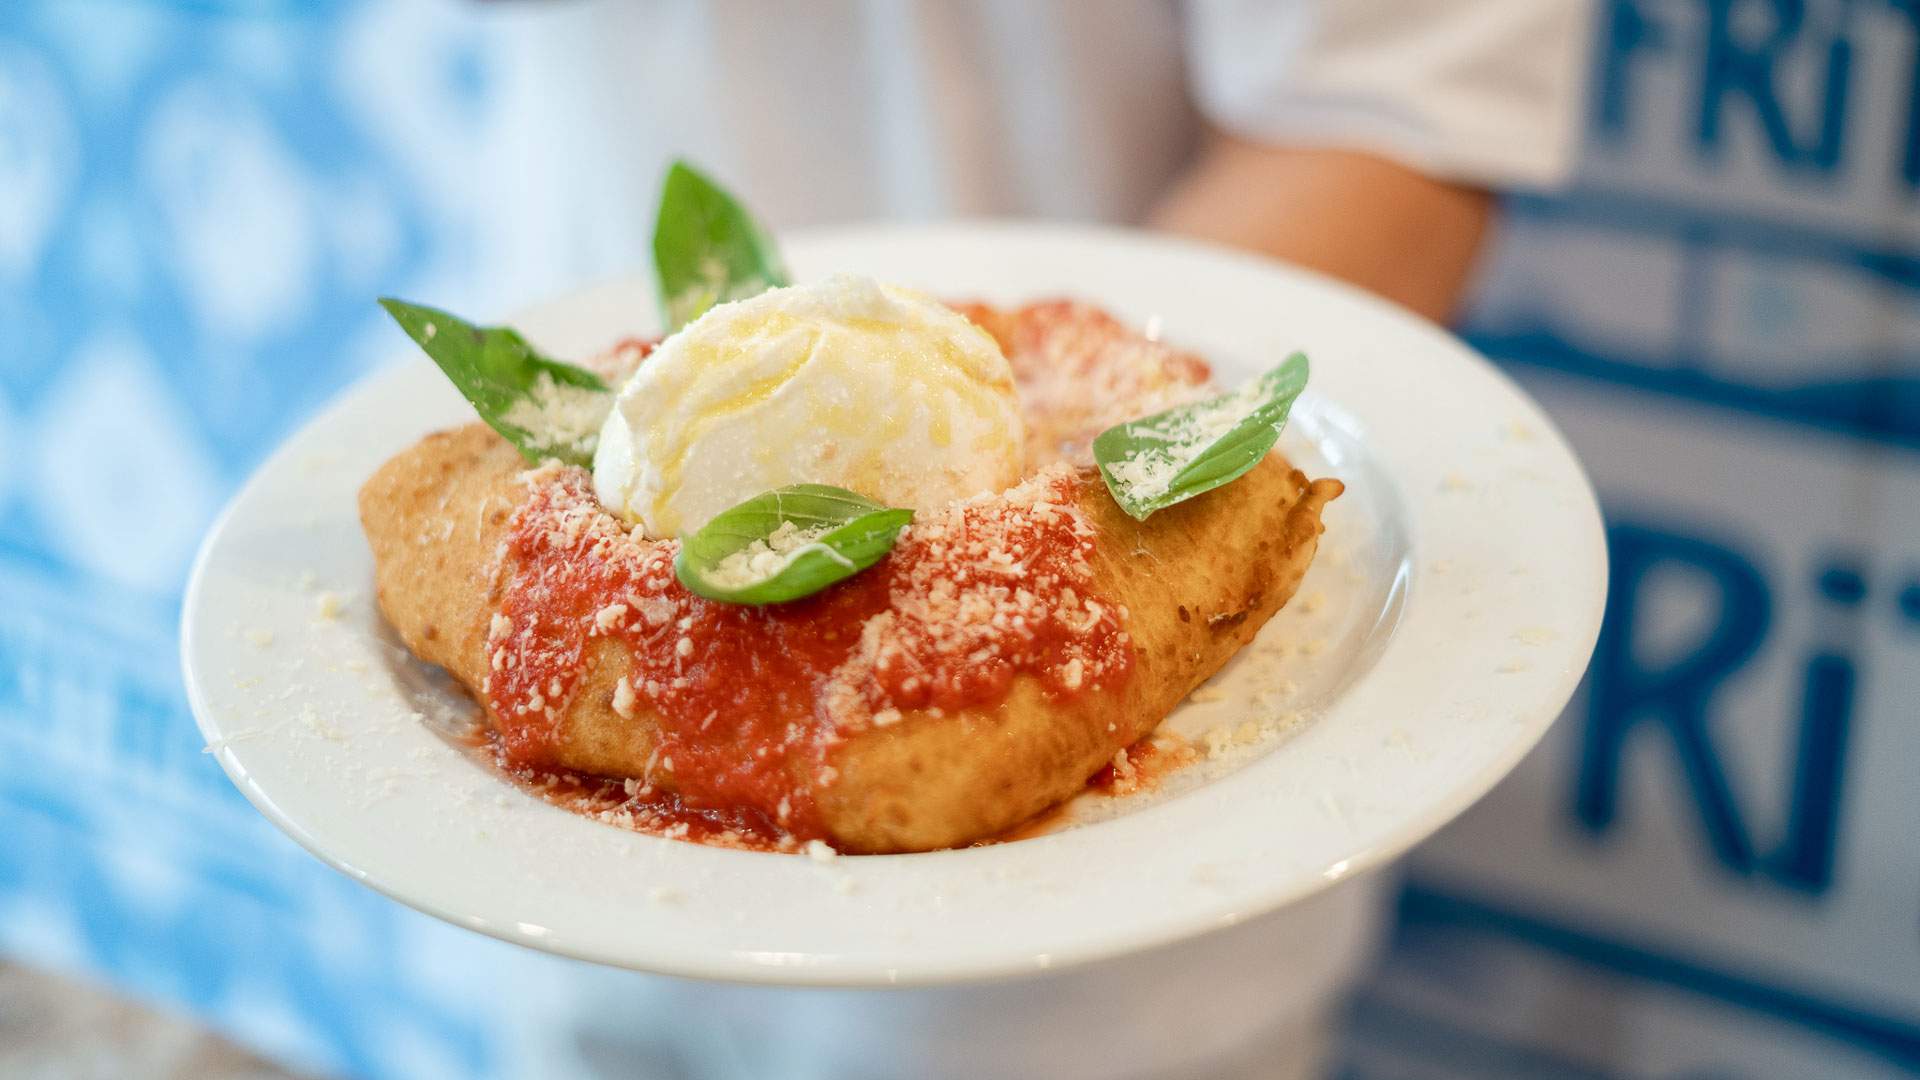 Pizza Fritta Is Surry Hills' Soon-to-Open Restaurant Dedicated to Fried Pizza